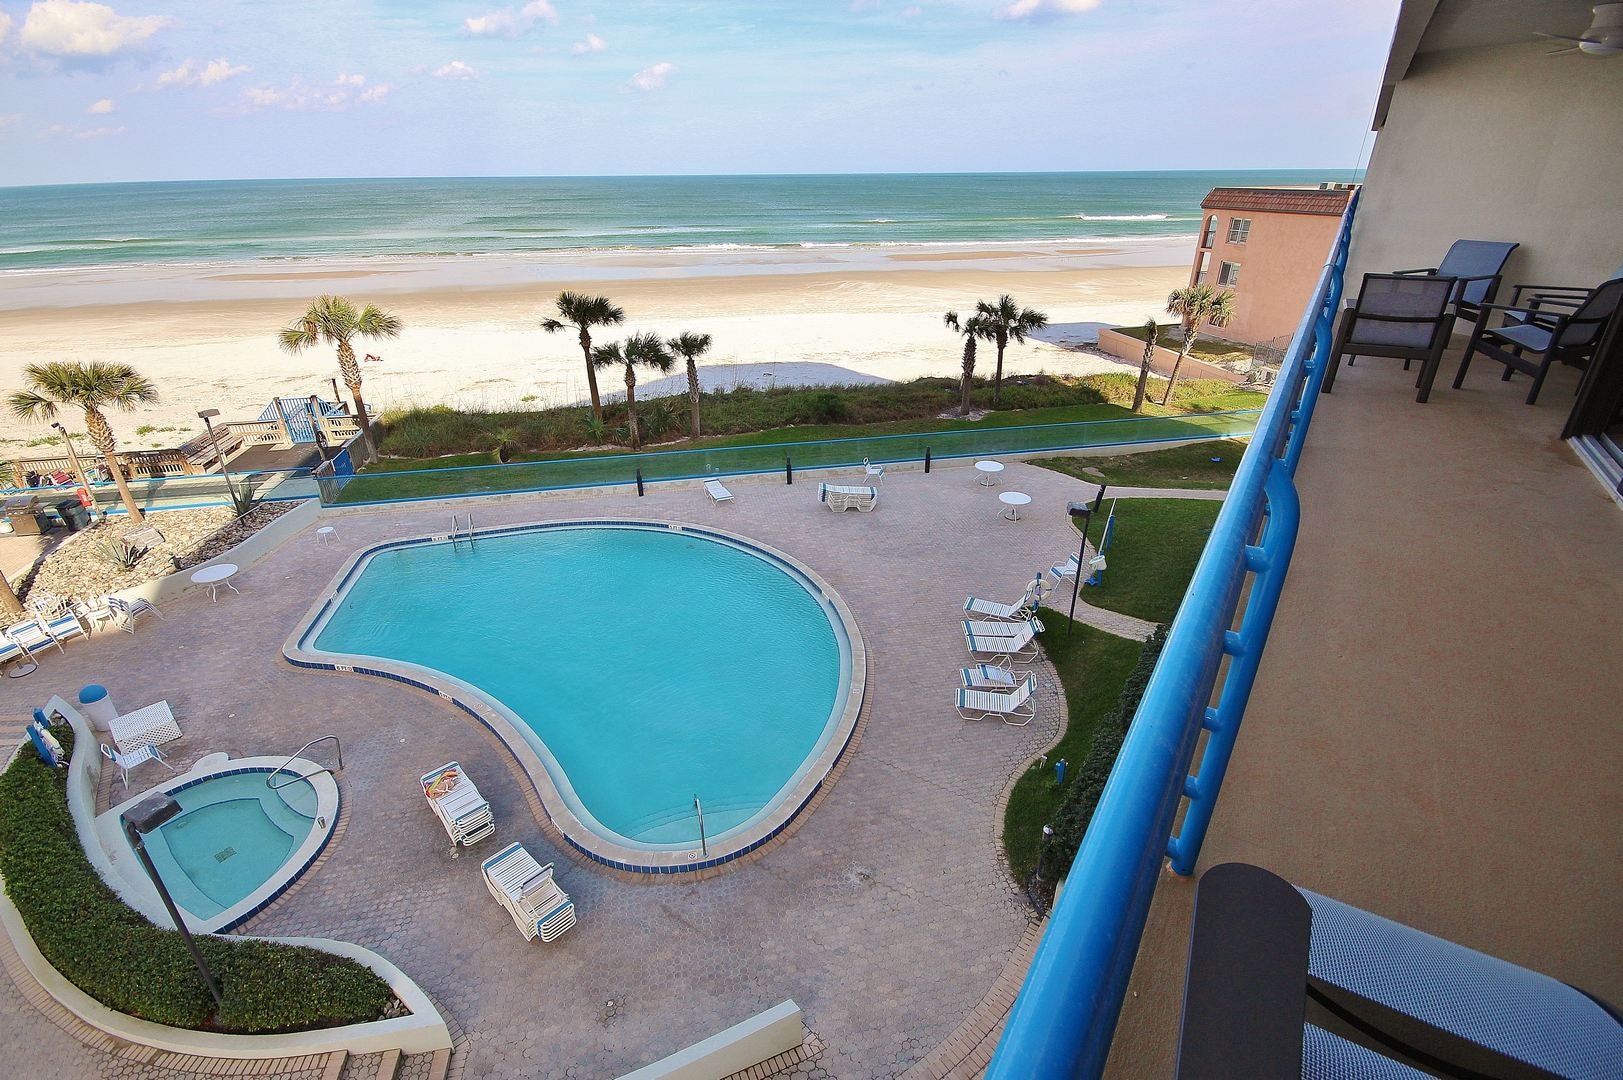 View of Beach & Pool from Balcony